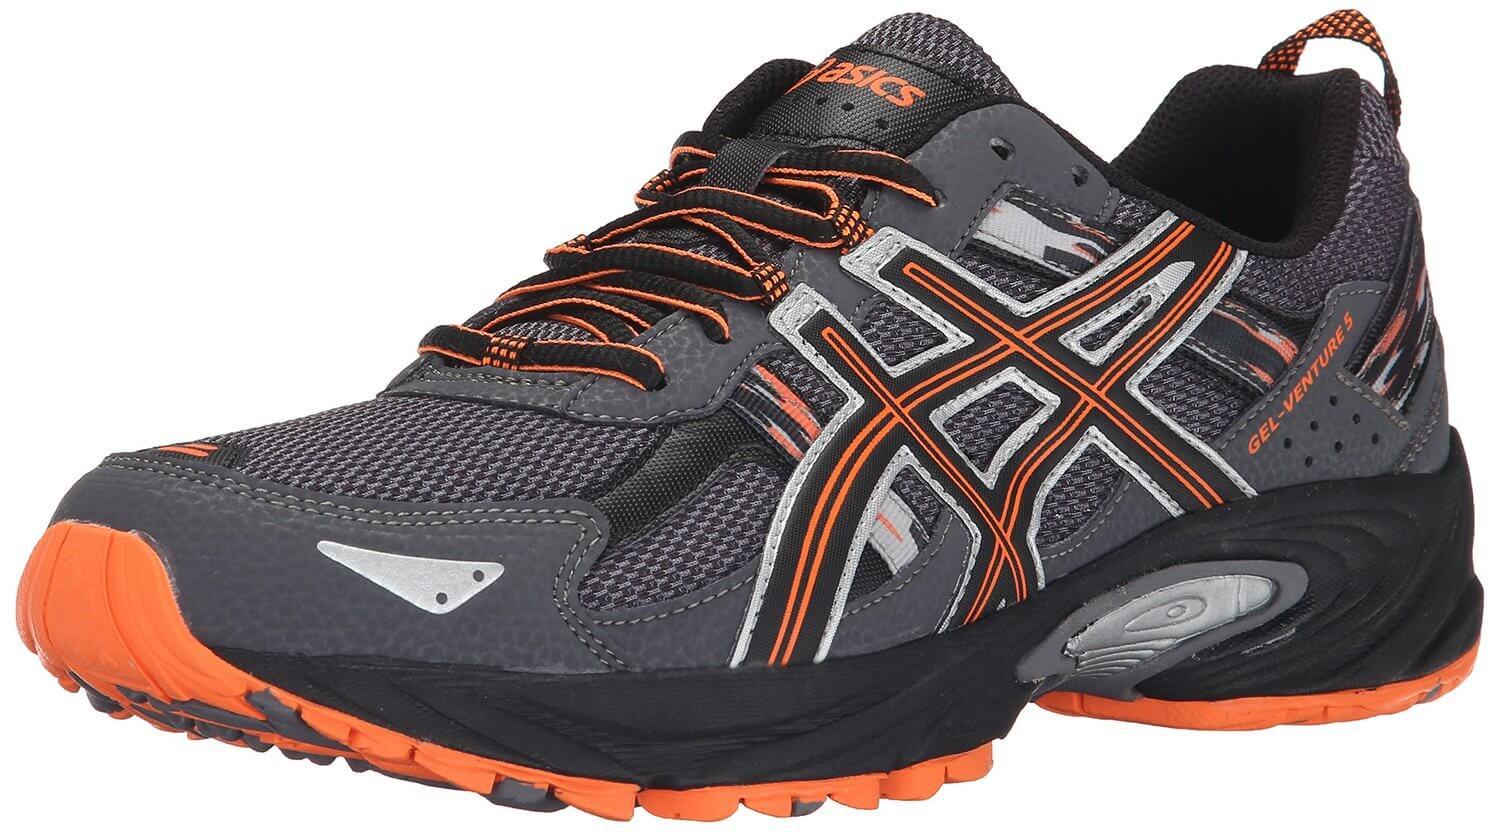 the Asics Gel Venture 5 is a low-cut trail running shoe that offers a good amount of protection and reliable traction